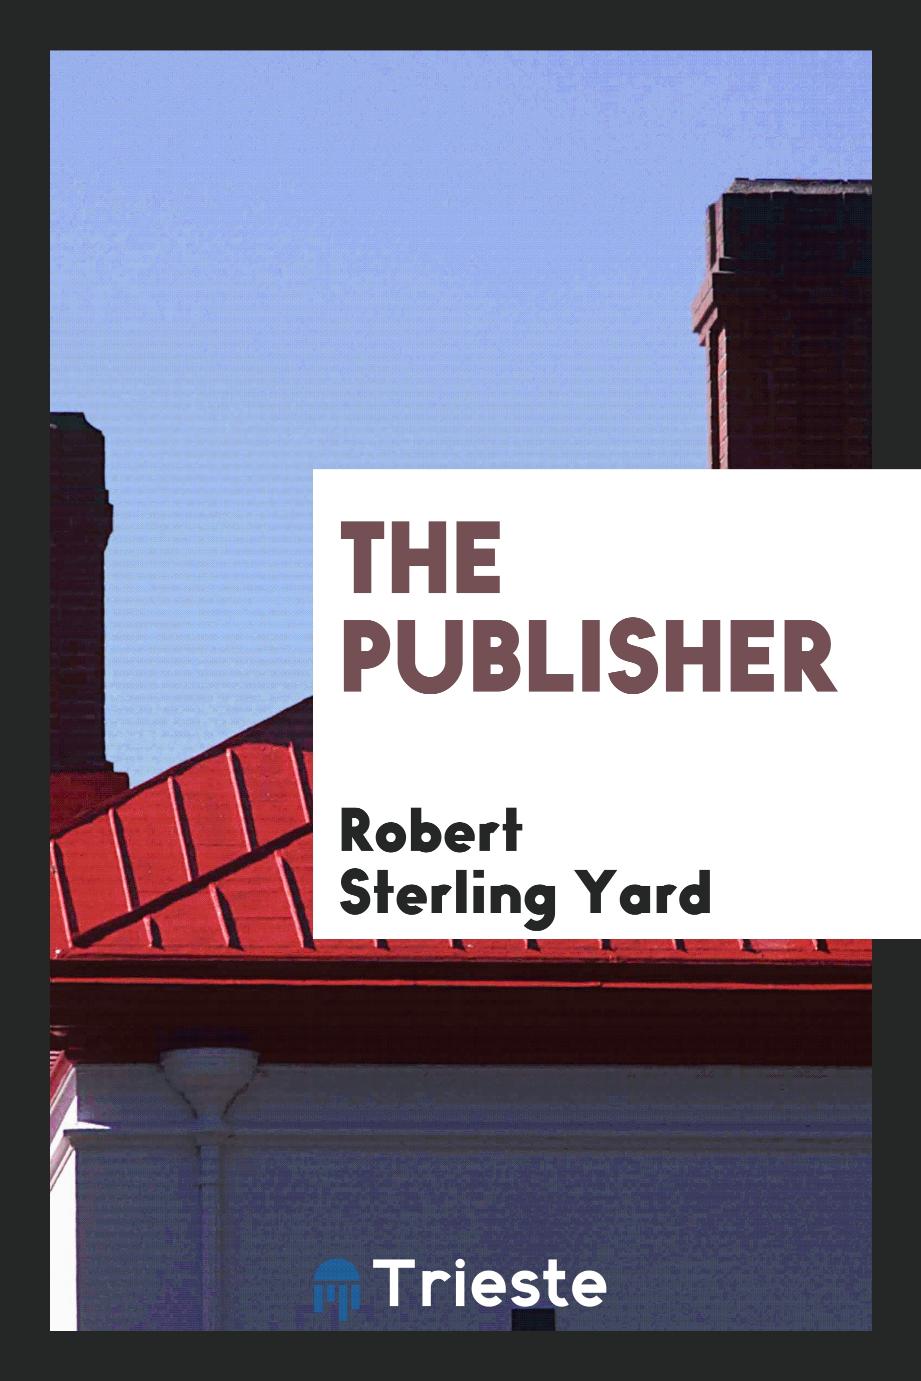 The publisher